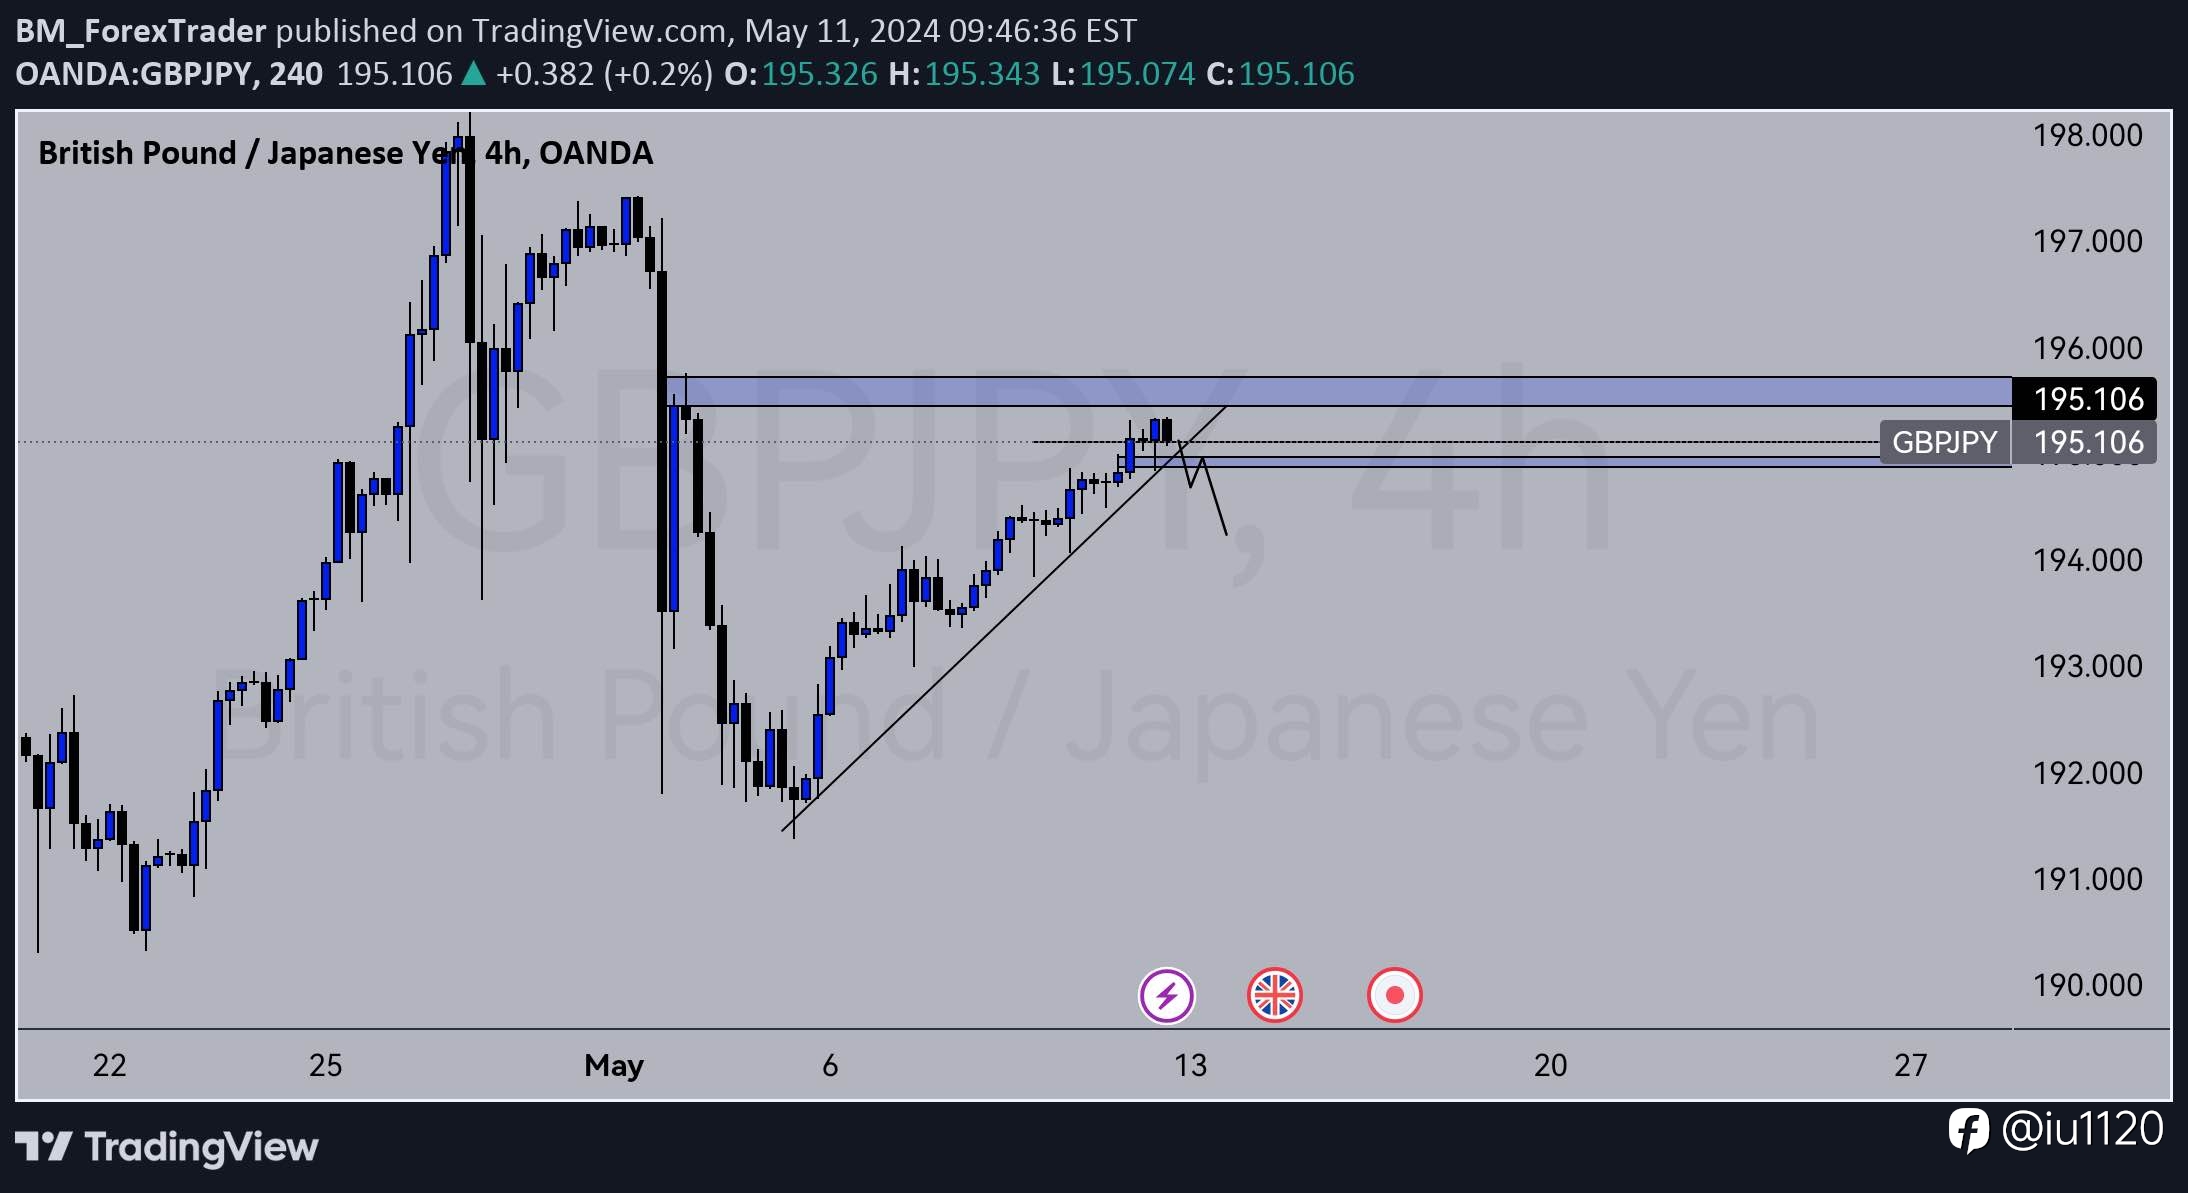 Sell GBP/JPY